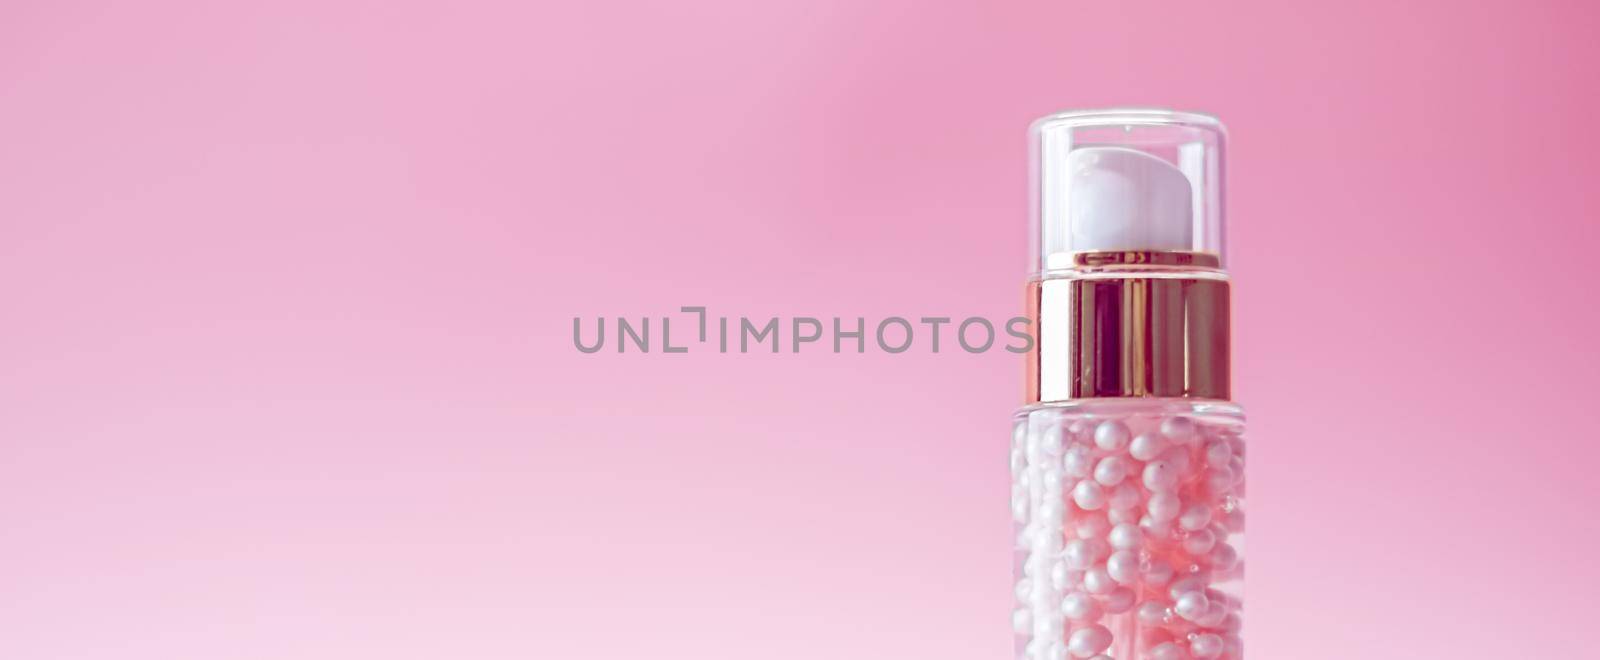 Skincare bottle on pink background, luxury beauty and cosmetic products by Anneleven